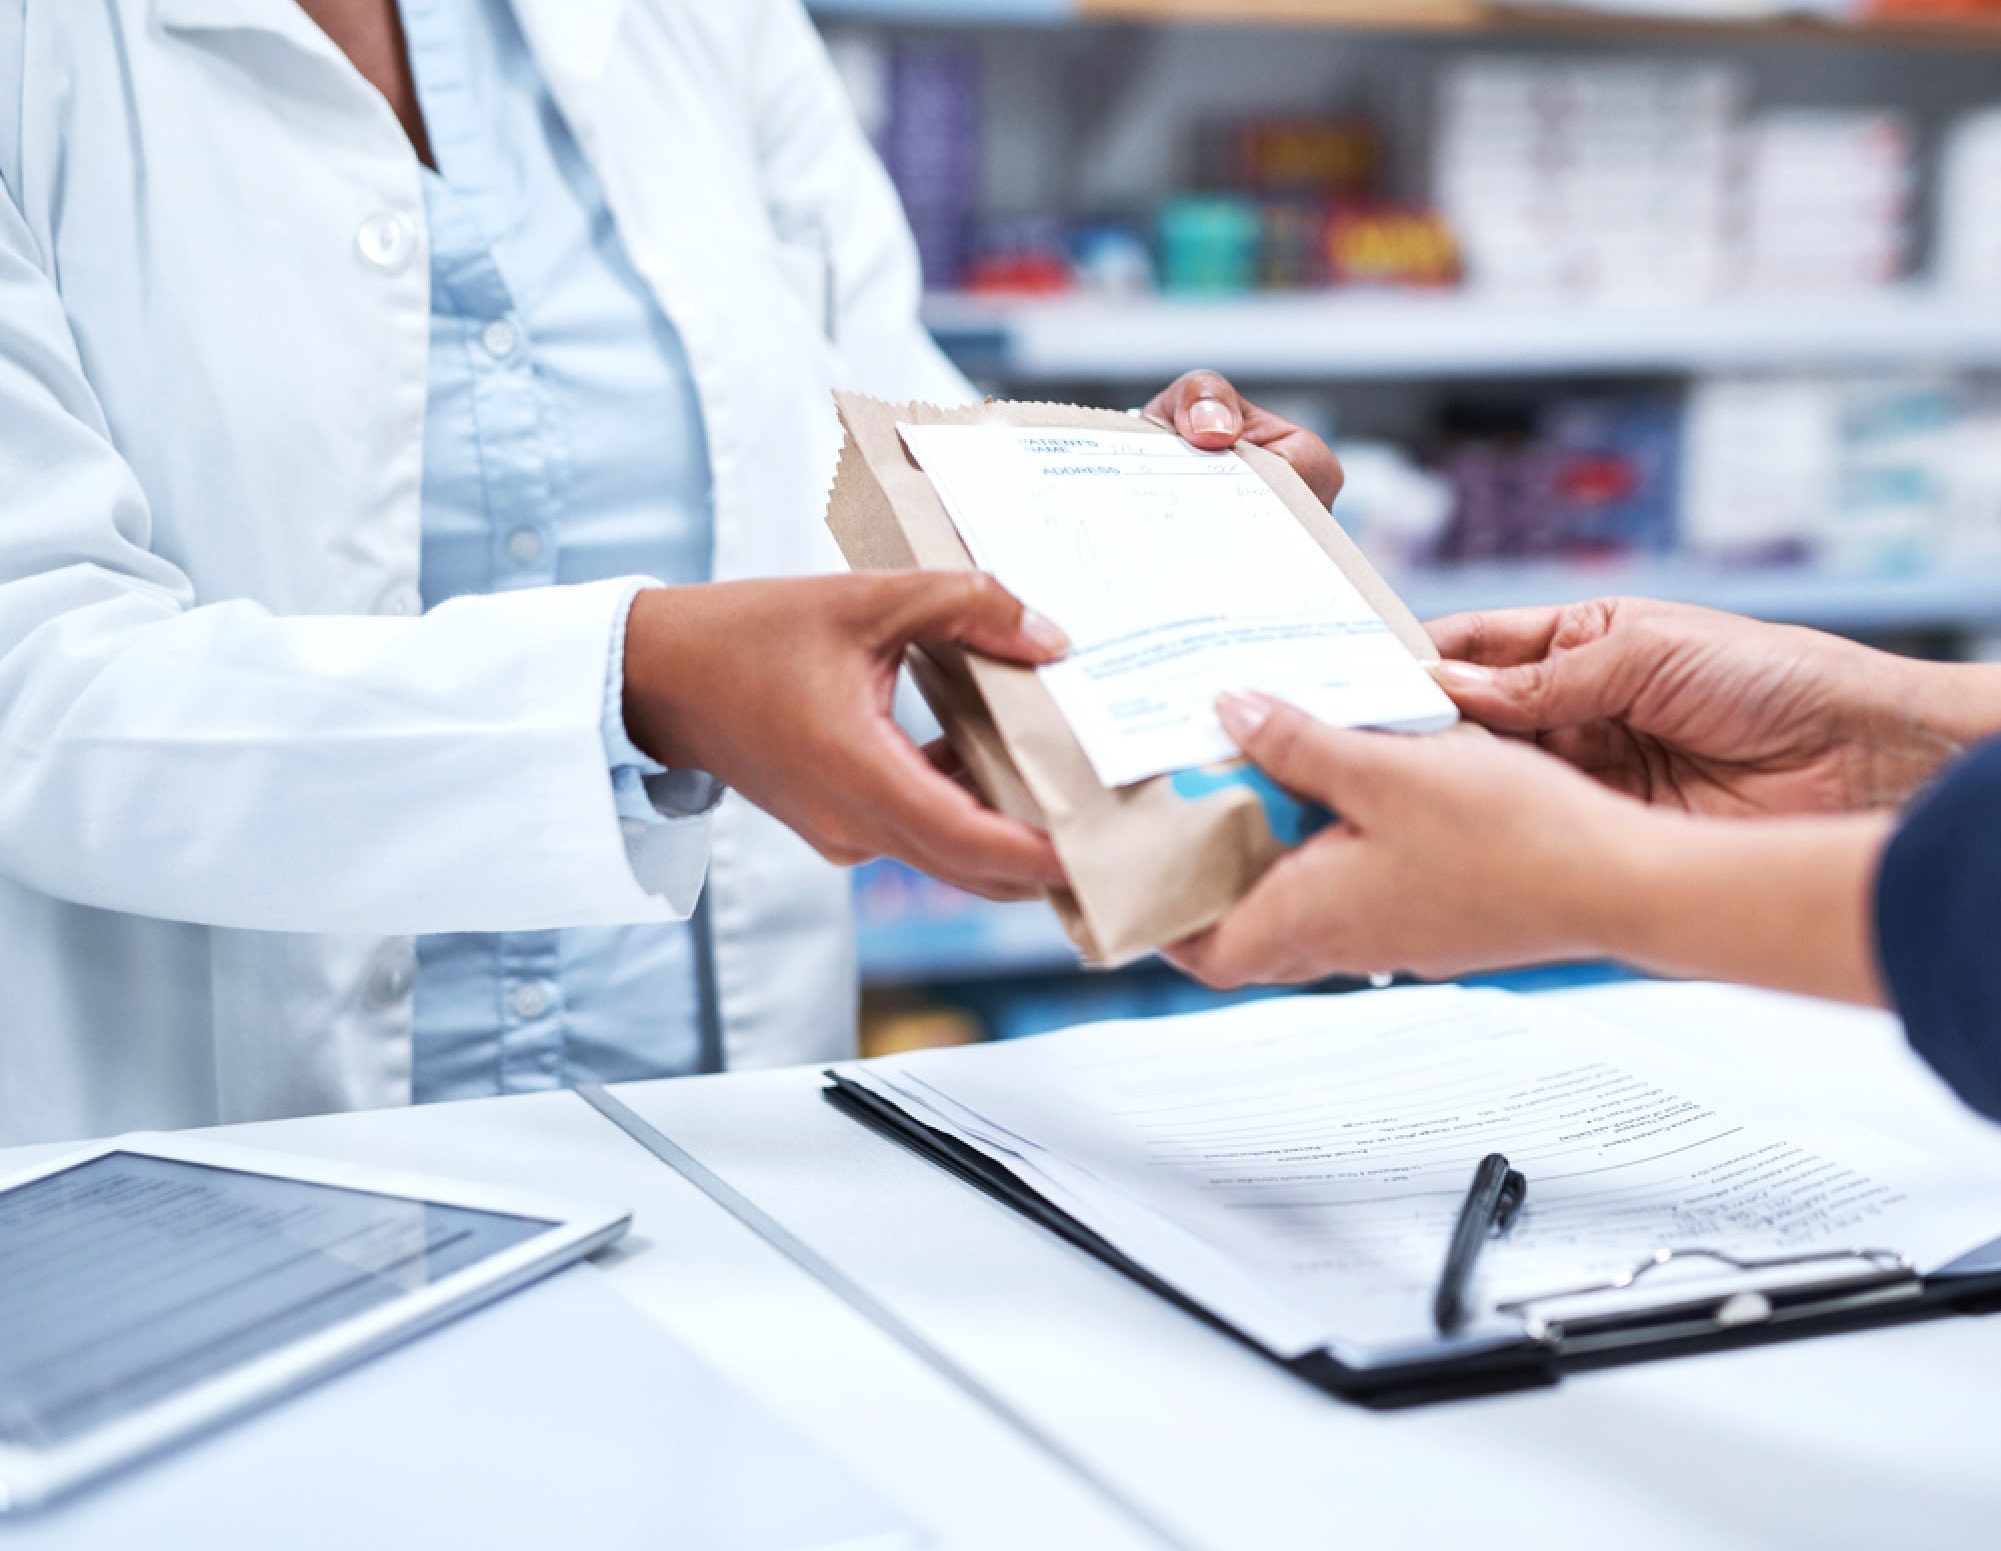 Report finds PBMs are increasingly restricting patient access to medicines